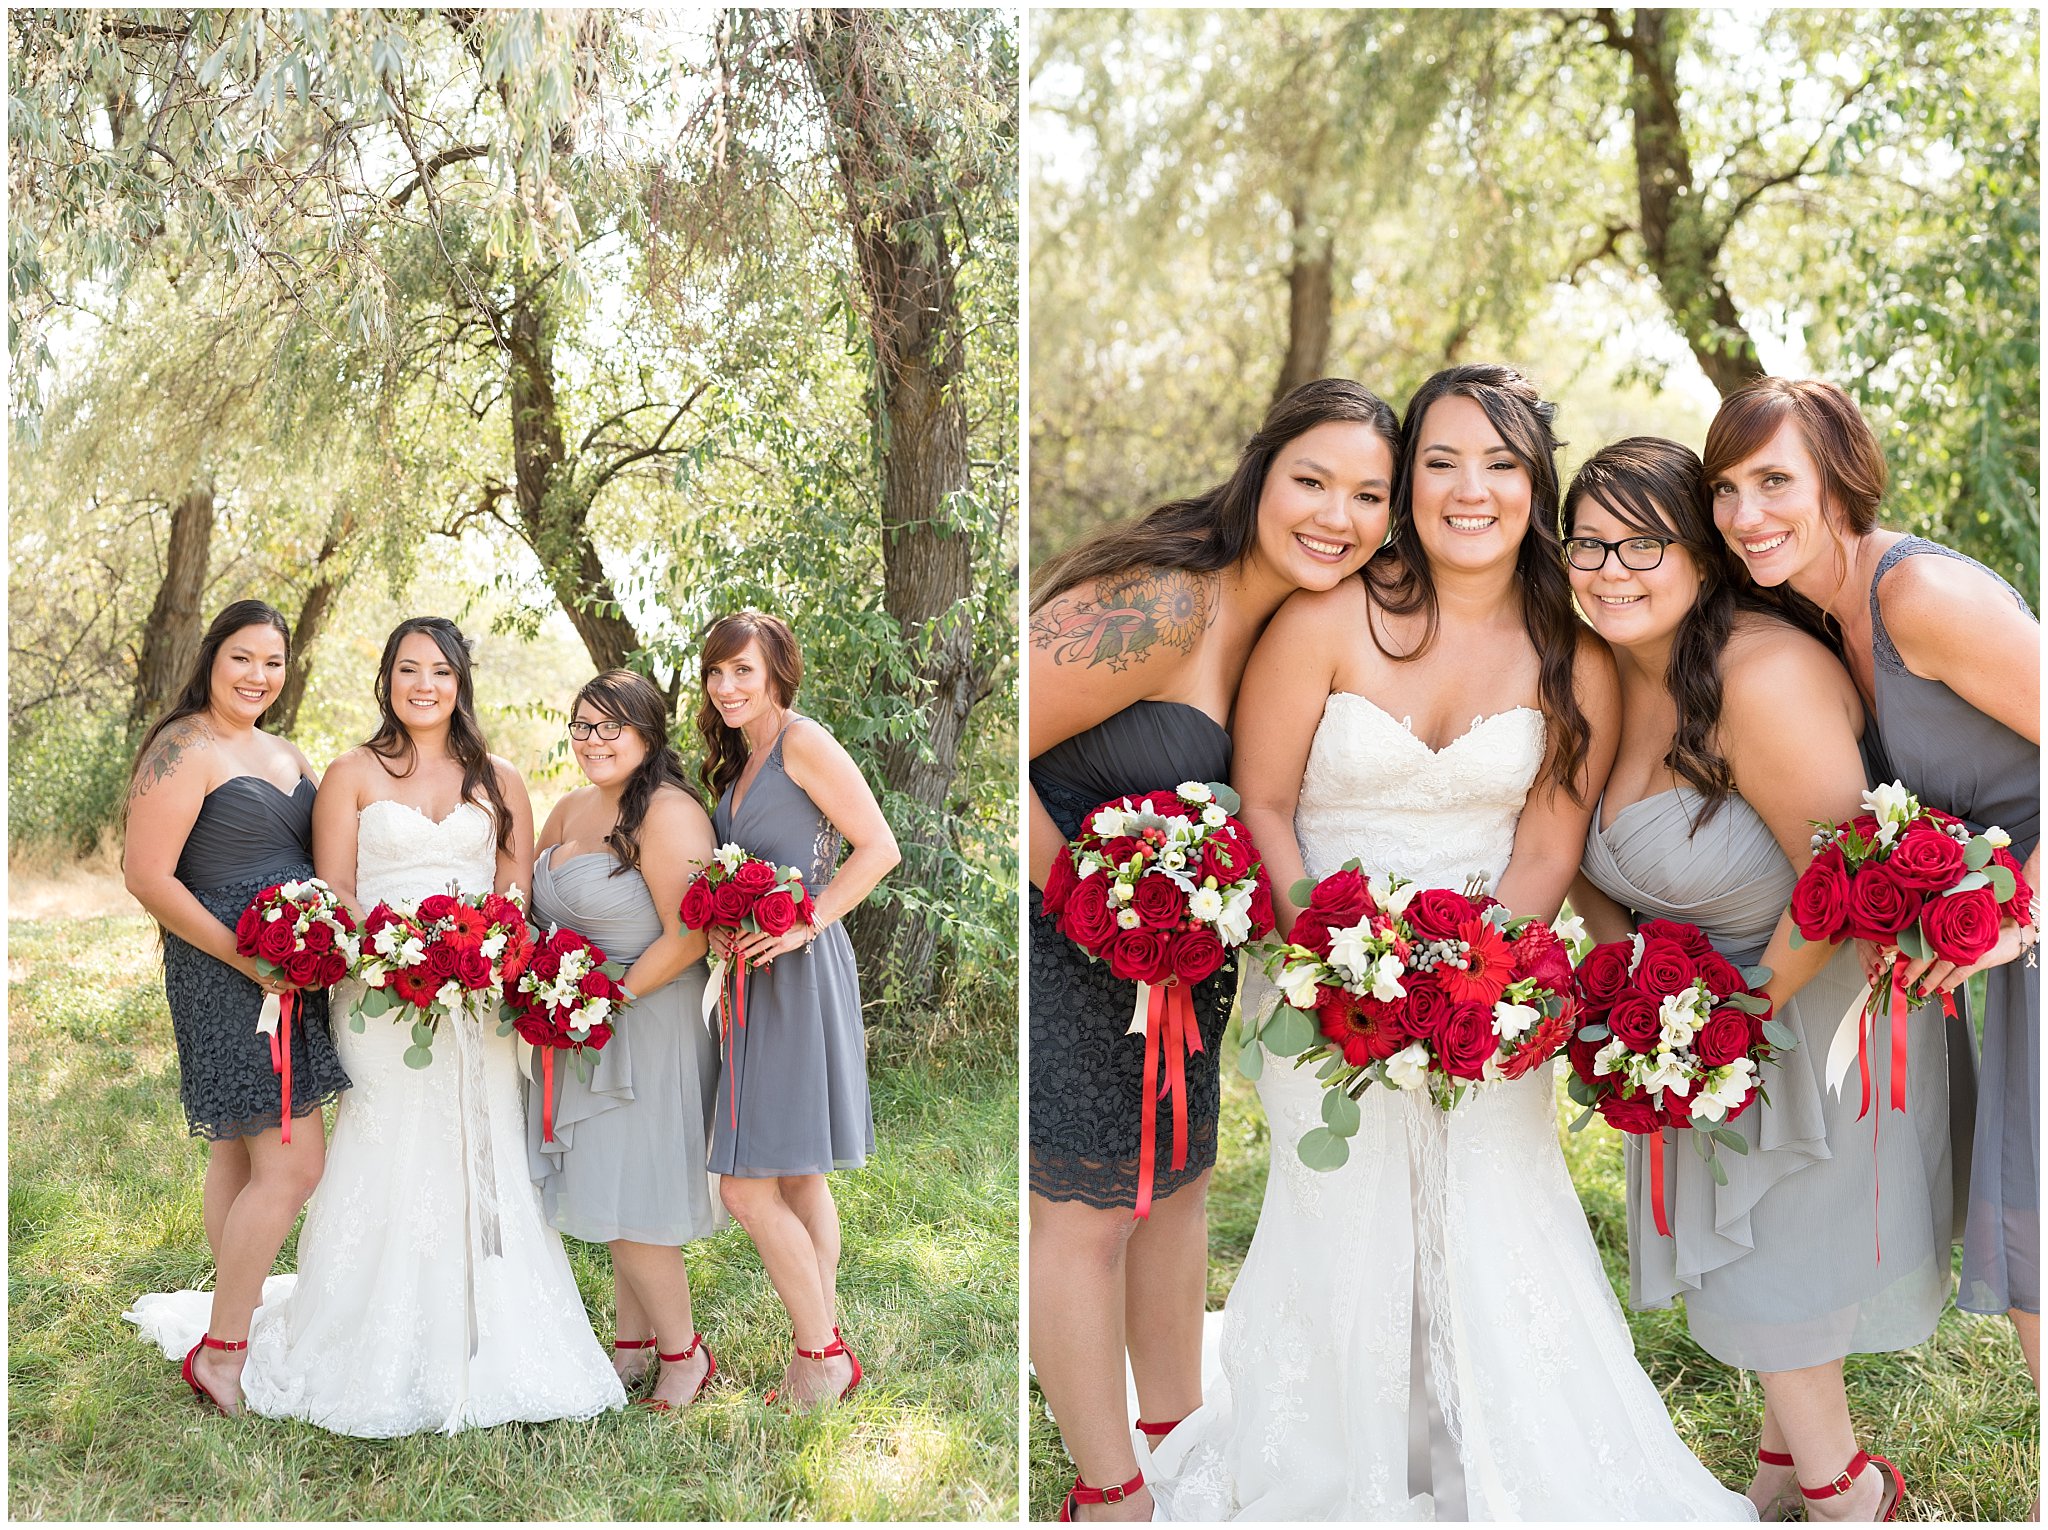 Red and white outdoor wedding | Bride and bridesmaids | Davis County Outdoor Wedding | Jessie and Dallin Photography